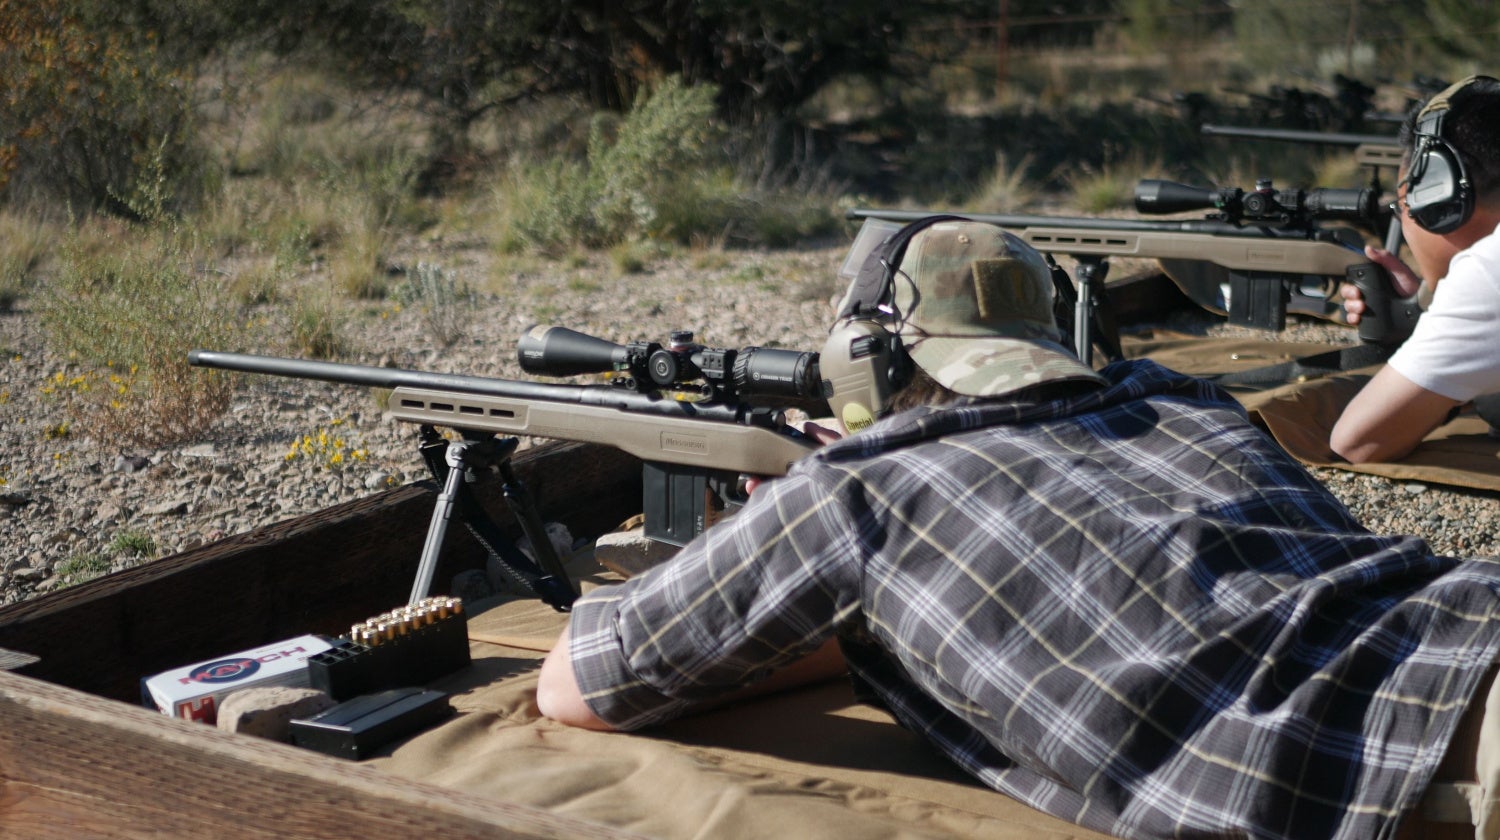 Mossberg Adds the New Patriot LR Tactical to the Bolt-Action Lineup